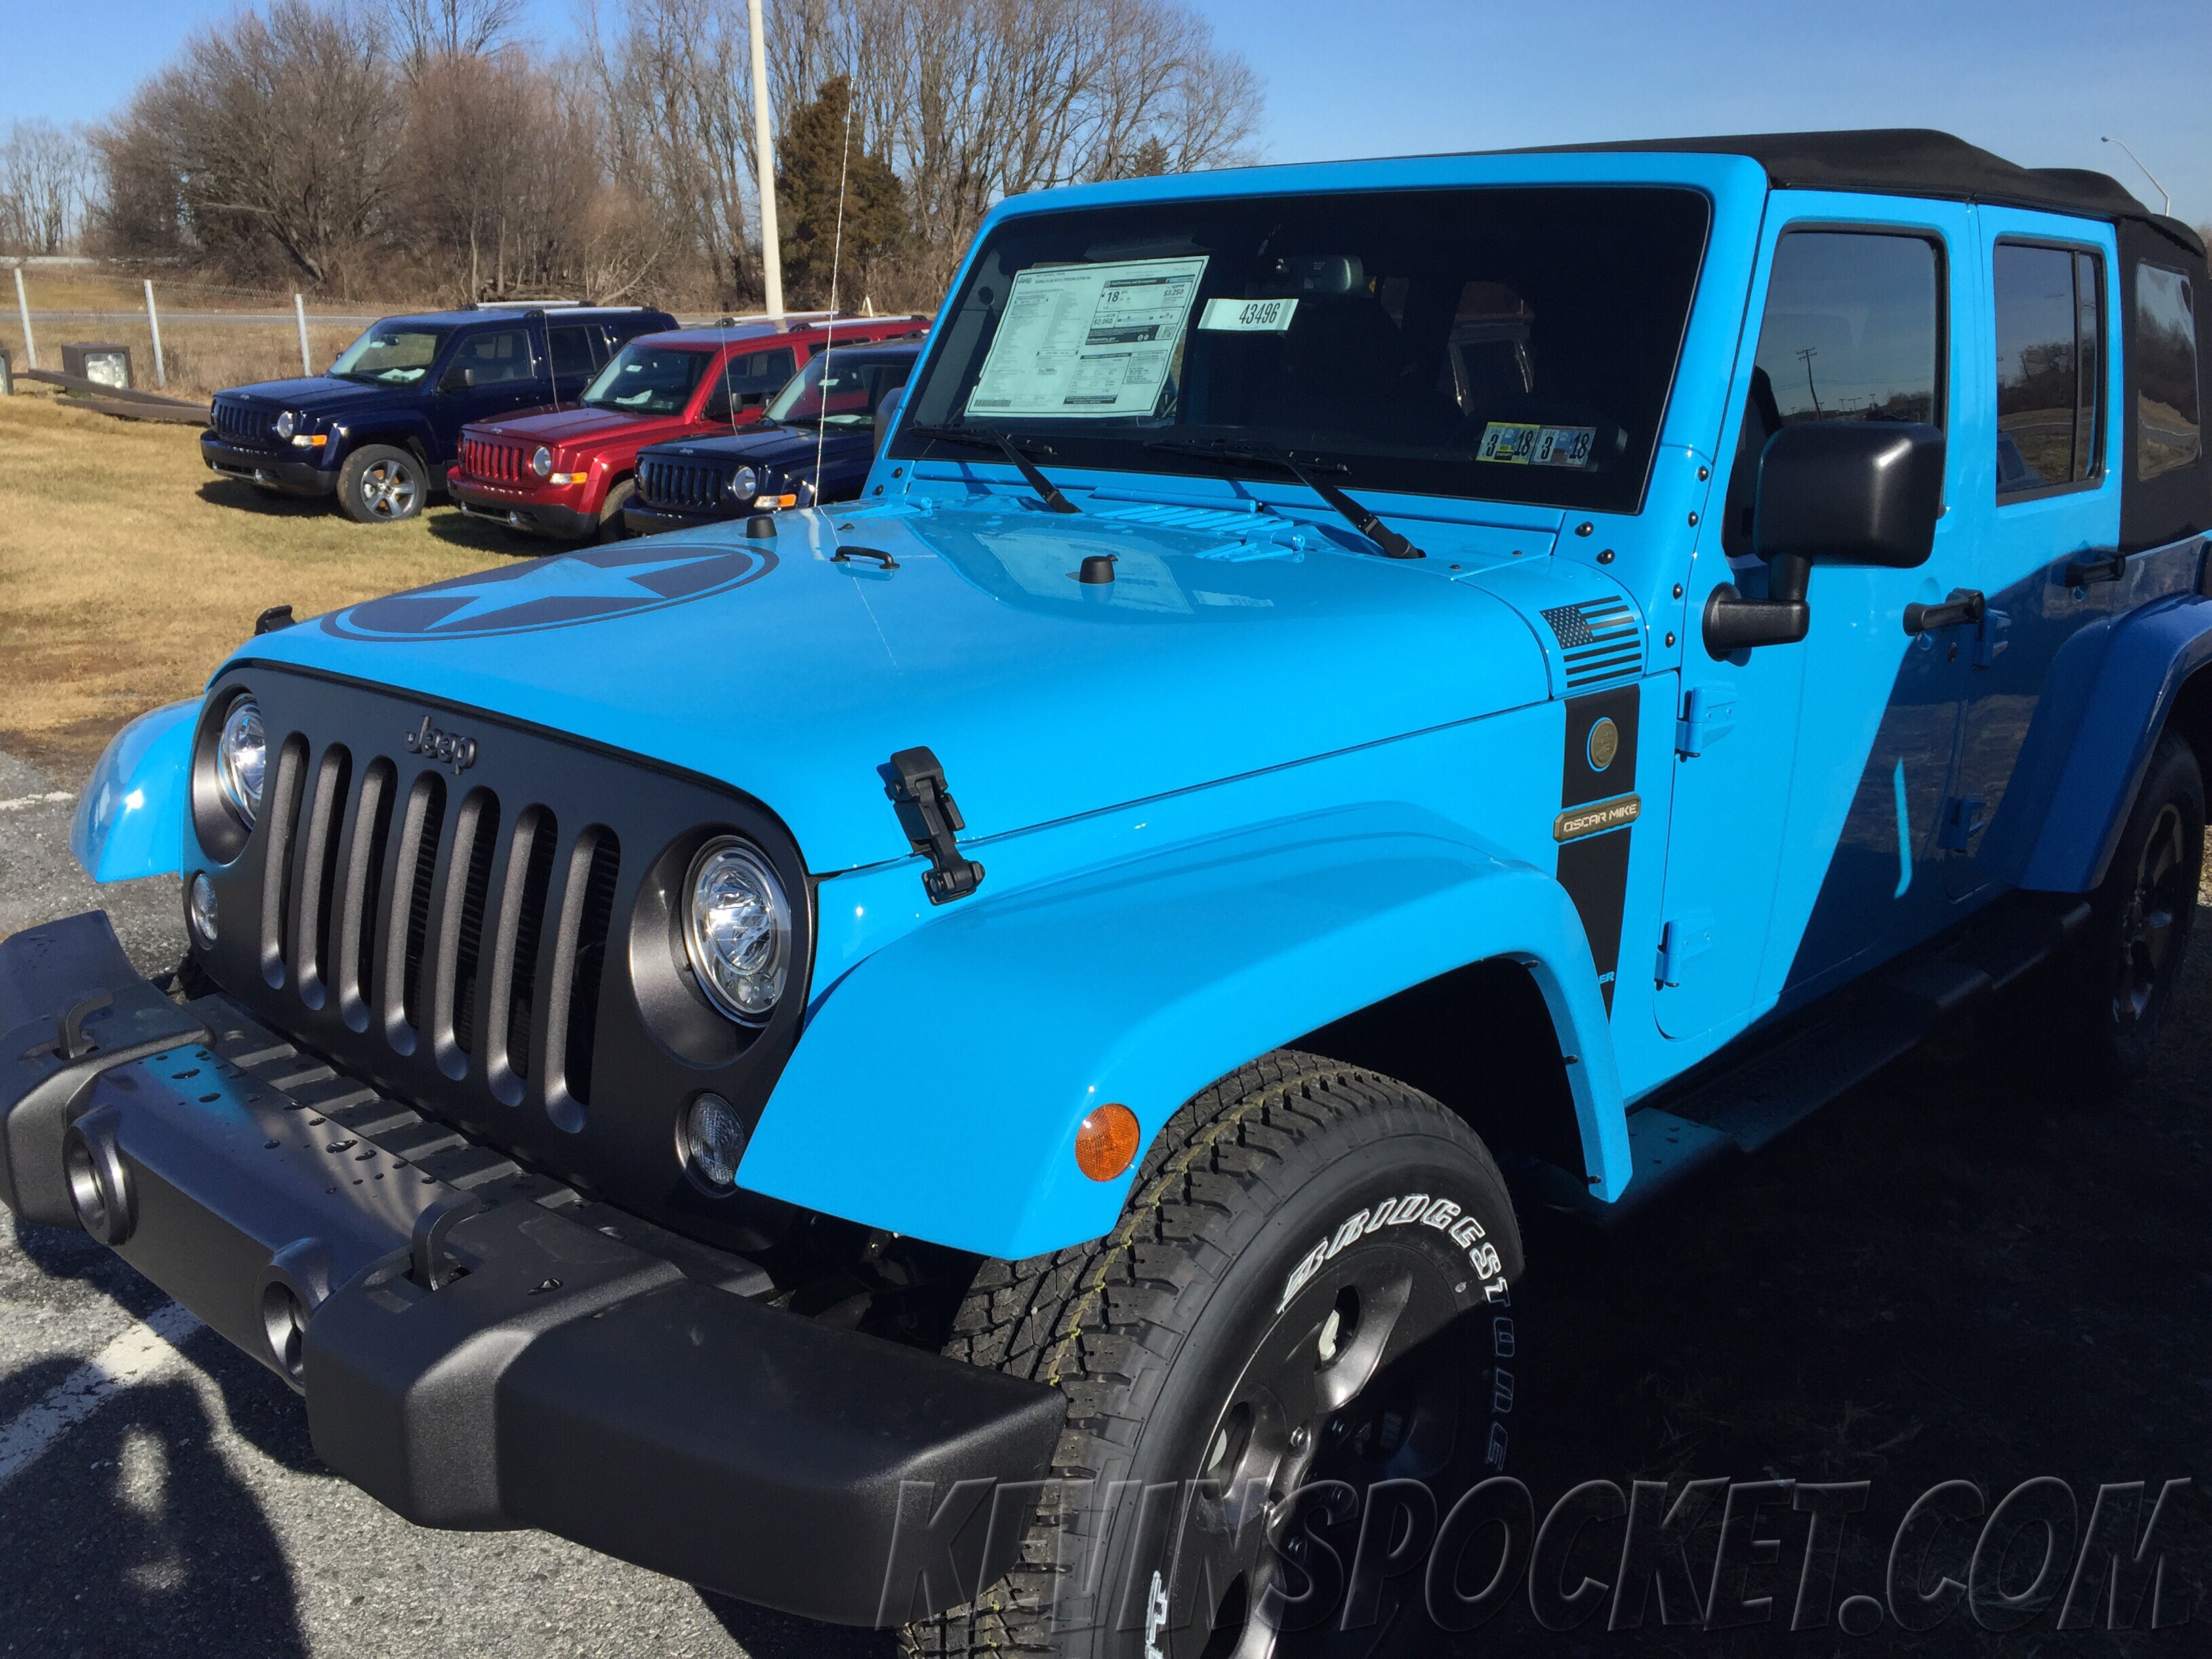 Chief Blue Wranglers Spotted! – kevinspocket